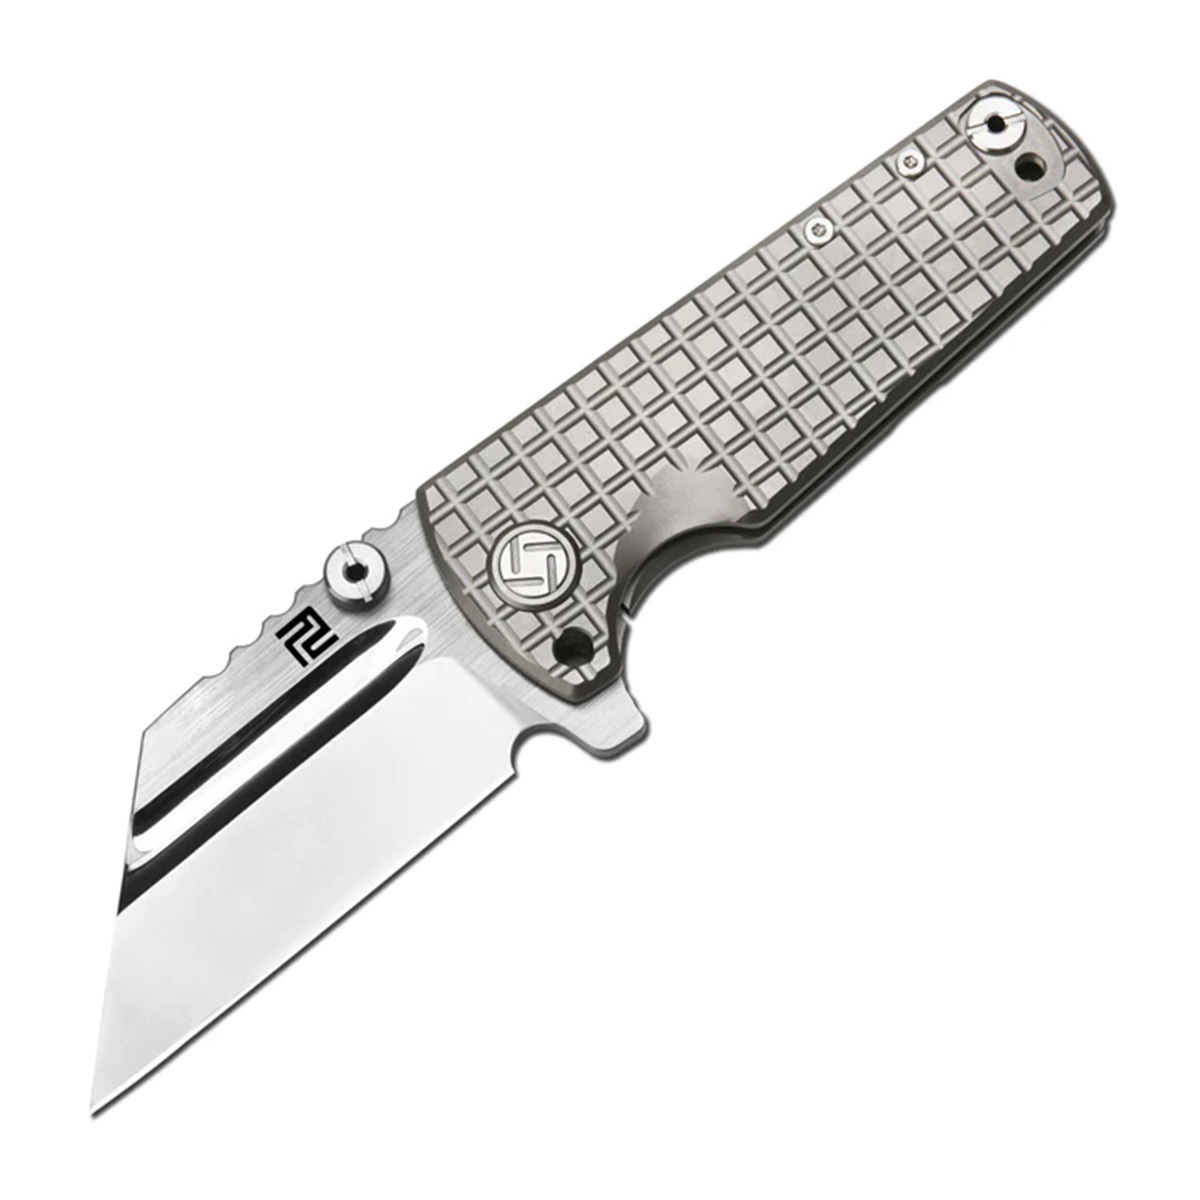   Artisan Cutlery Proponent,  S35VN,  